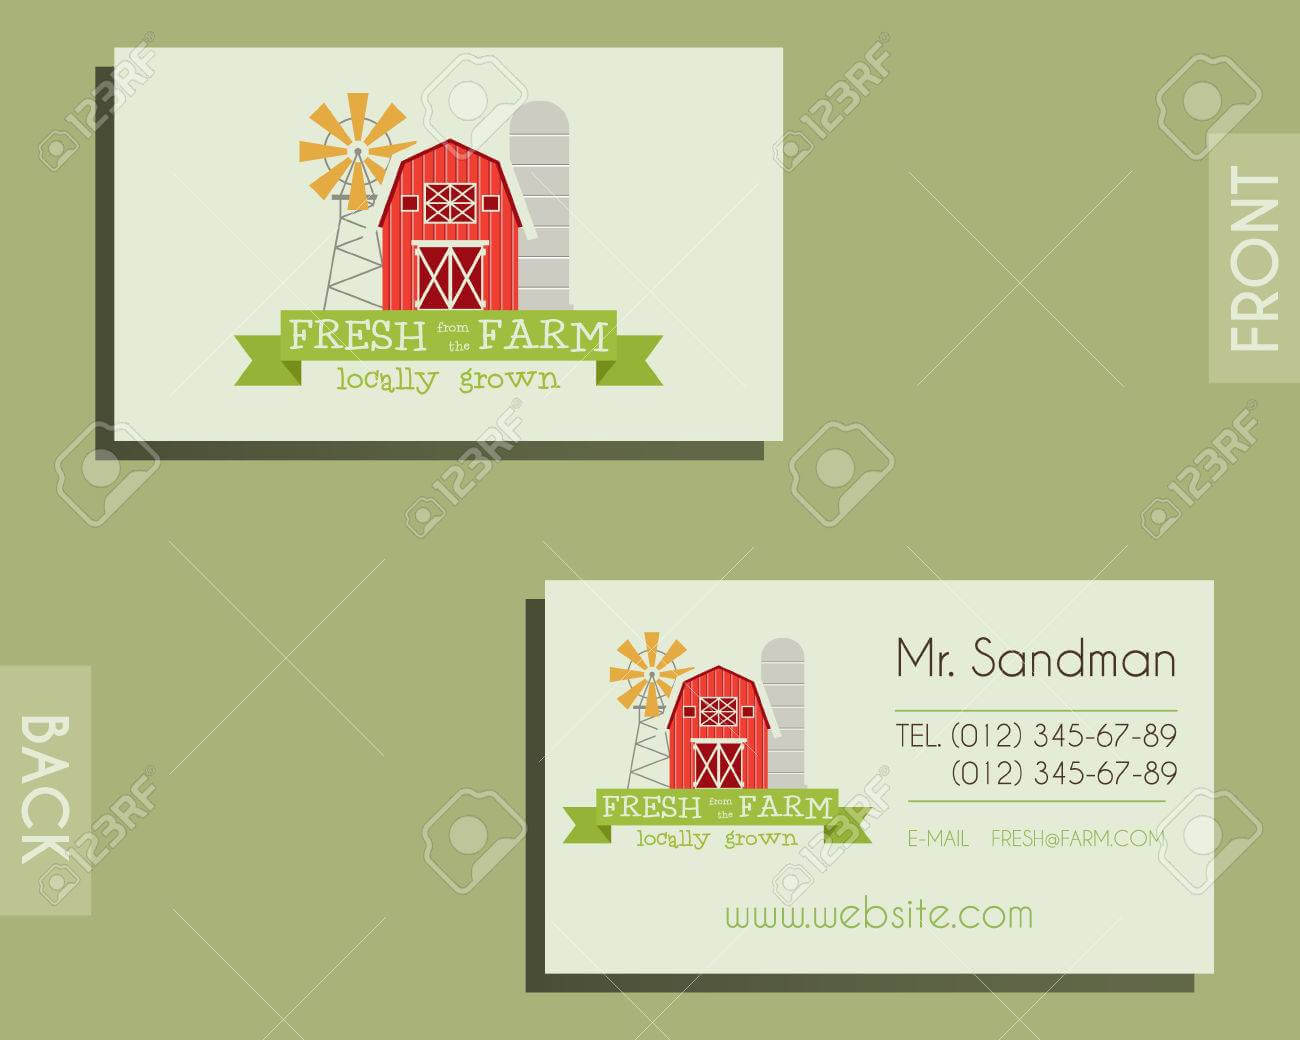 Eco, Organic Visiting Card Template. For Natural Shop, Farm Products And  Other Bio, Organic Business. Ecology Theme. Eco Design. Vector Illustration For Bio Card Template